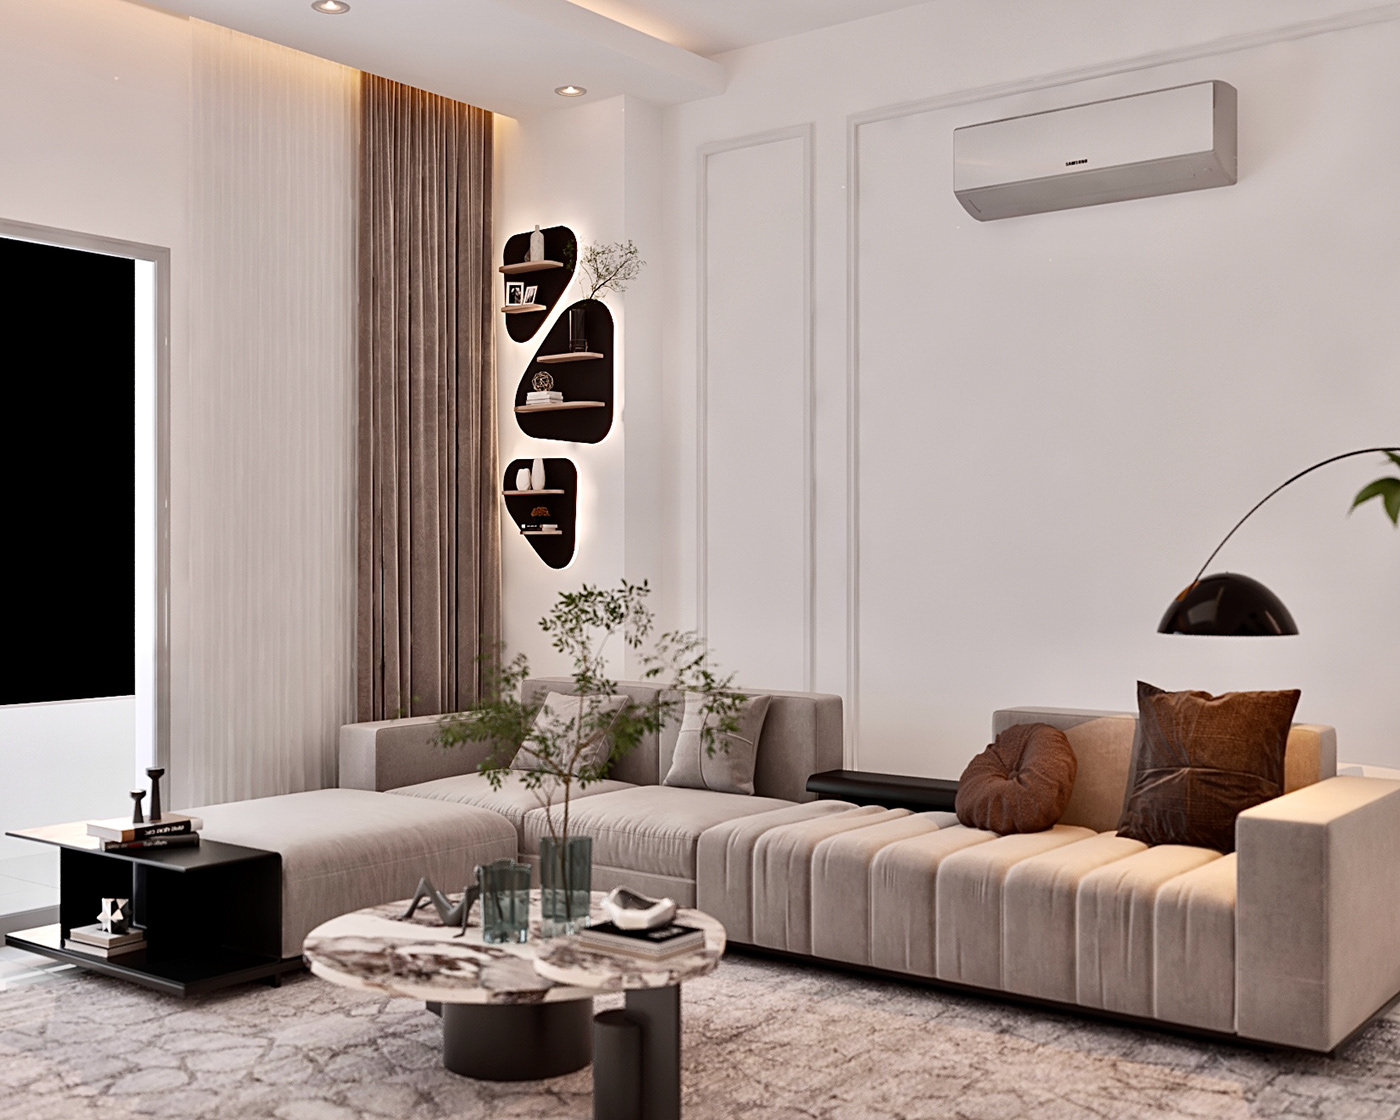 living room interior design  Render 3ds max 3D architecture visualization modern vray